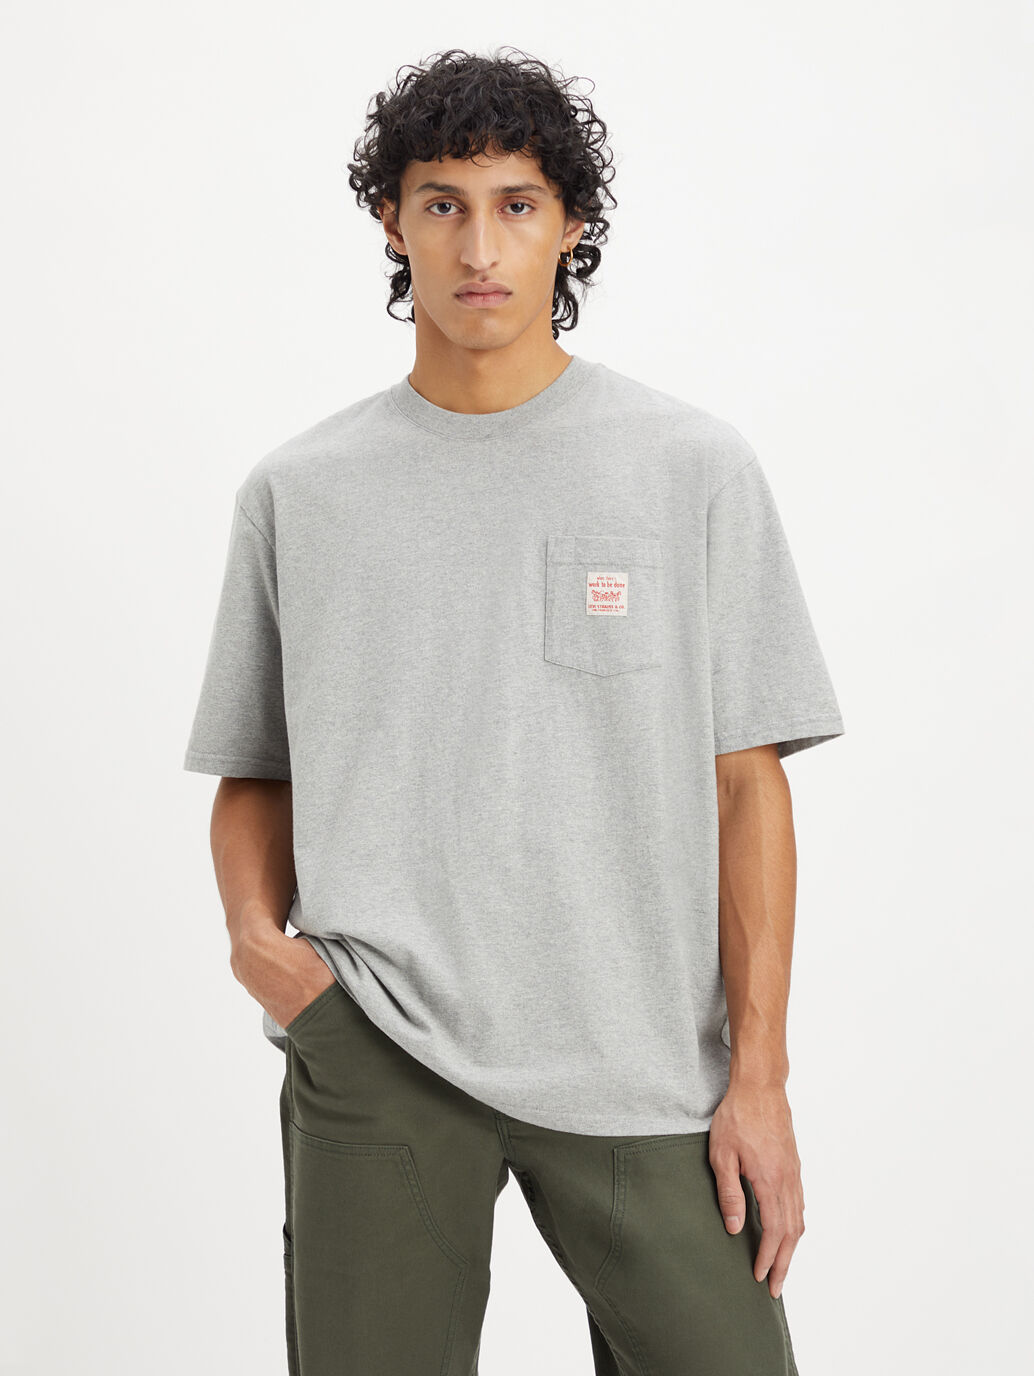 Men's Grey Workwear T-Shirt in Classic Silhouette Buy Now